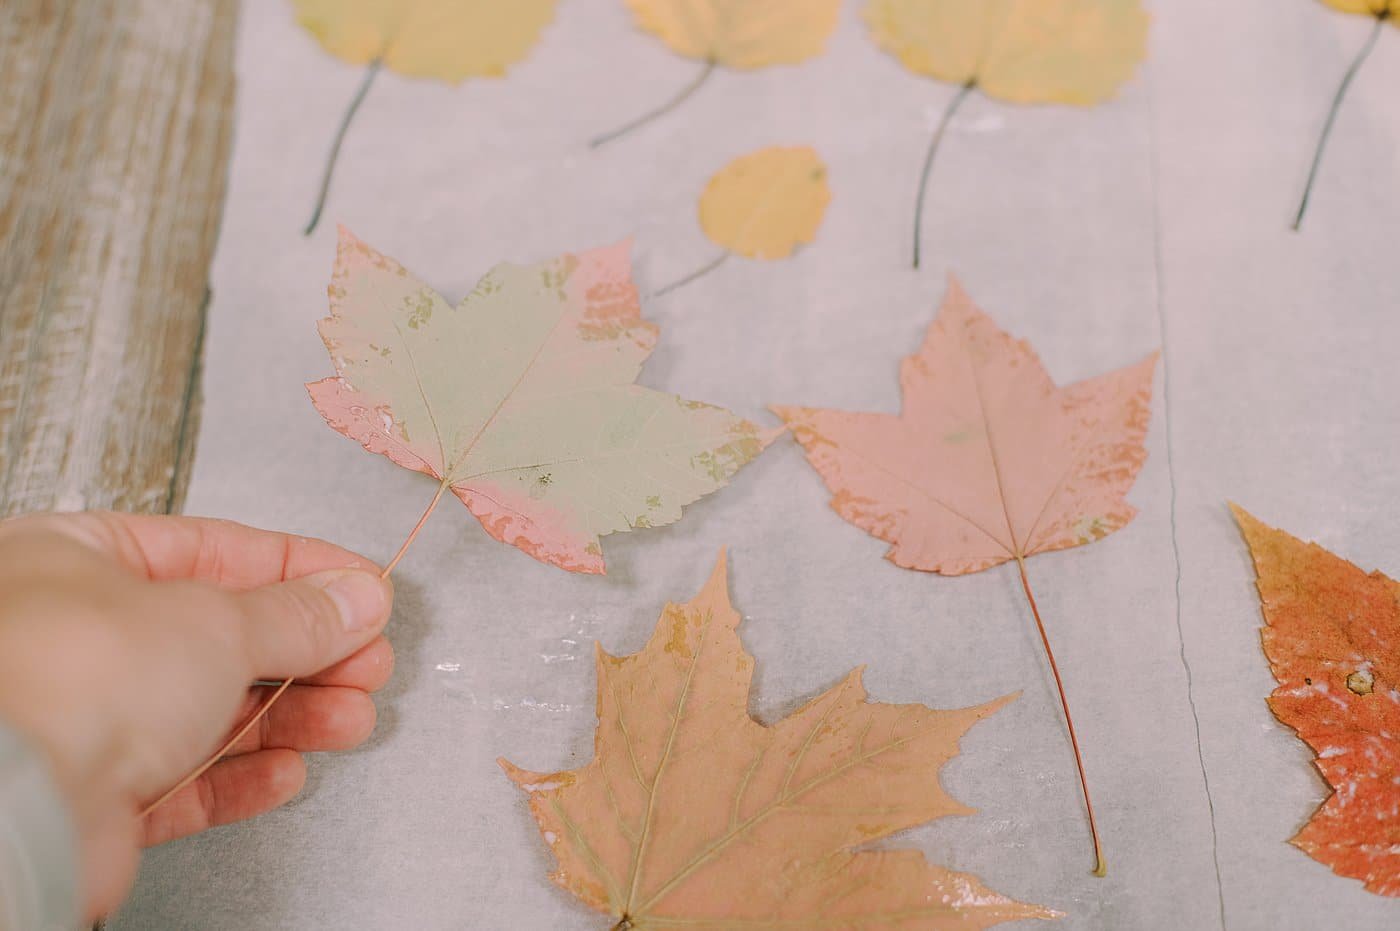 Flip the leaves over and add a layer of Mod Podge to the other side.